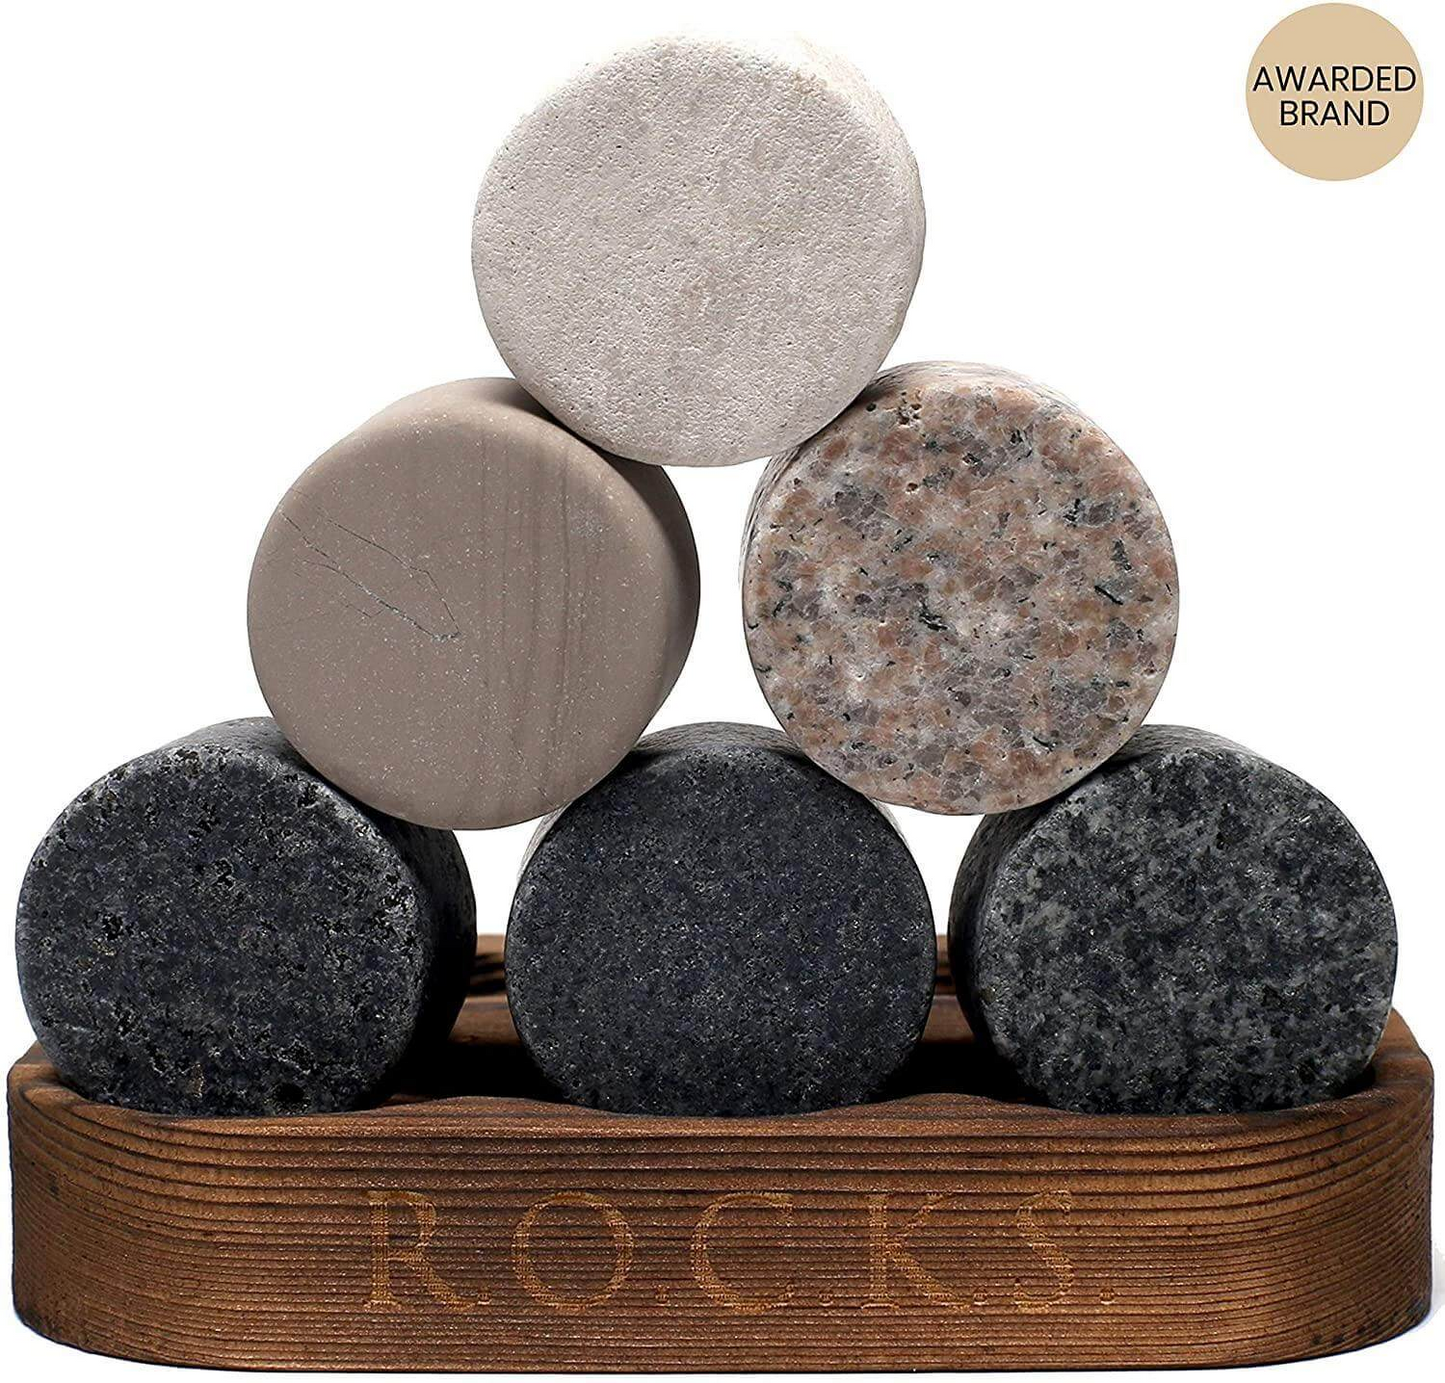 R.O.C.K.S Whiskey Chilling Stones Gift Set With 2 Twist Crystal Glasses